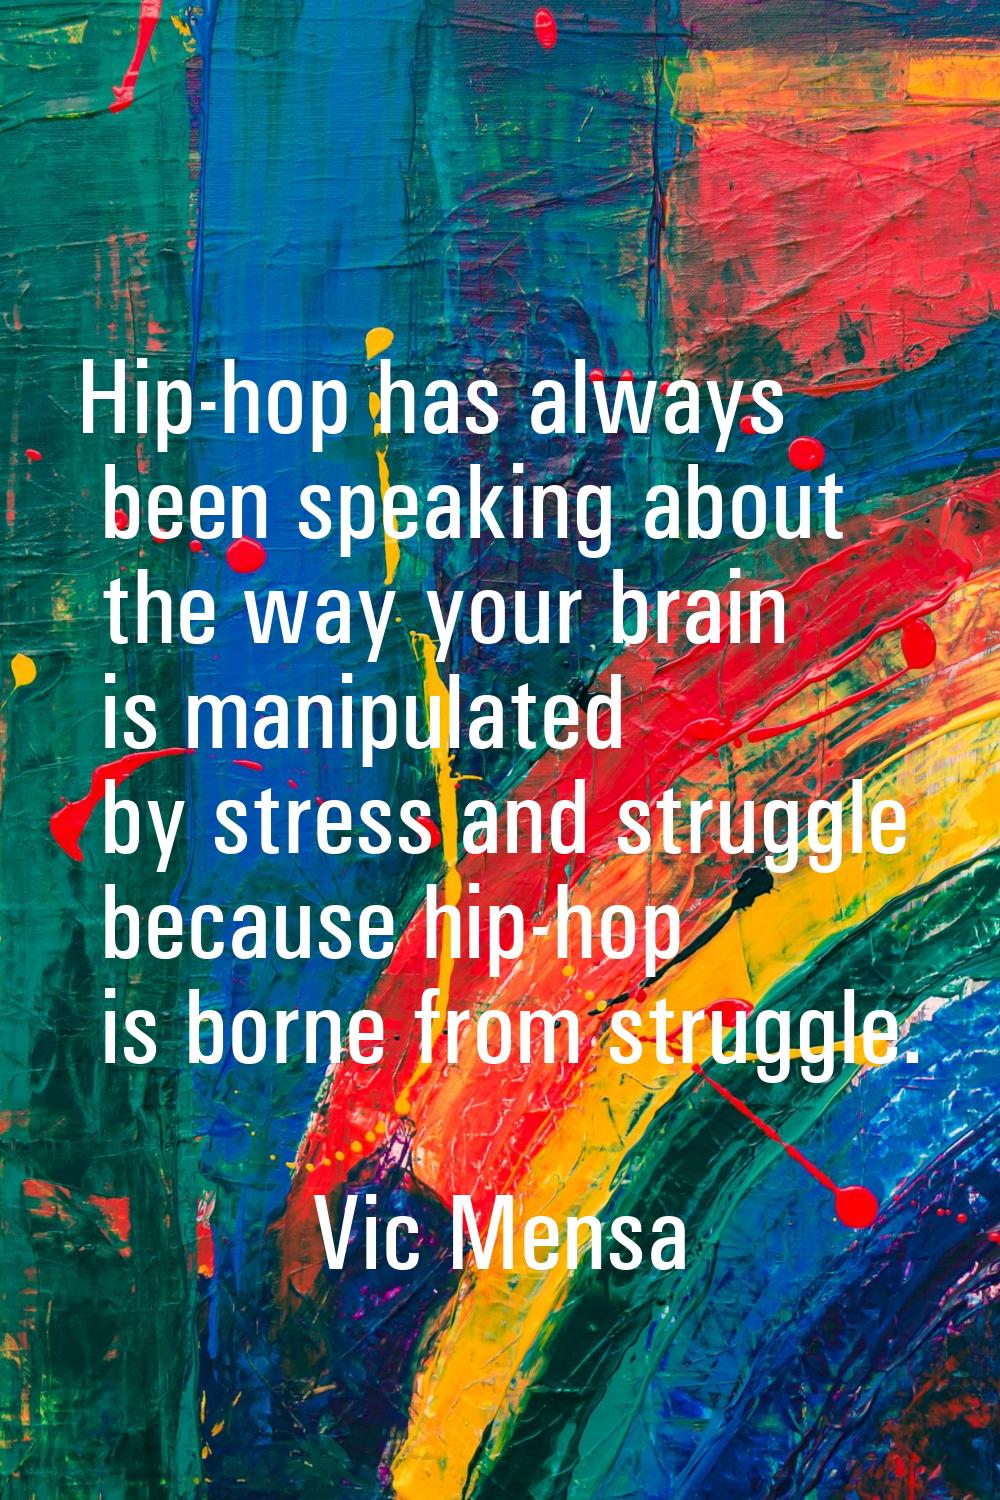 Hip-hop has always been speaking about the way your brain is manipulated by stress and struggle bec